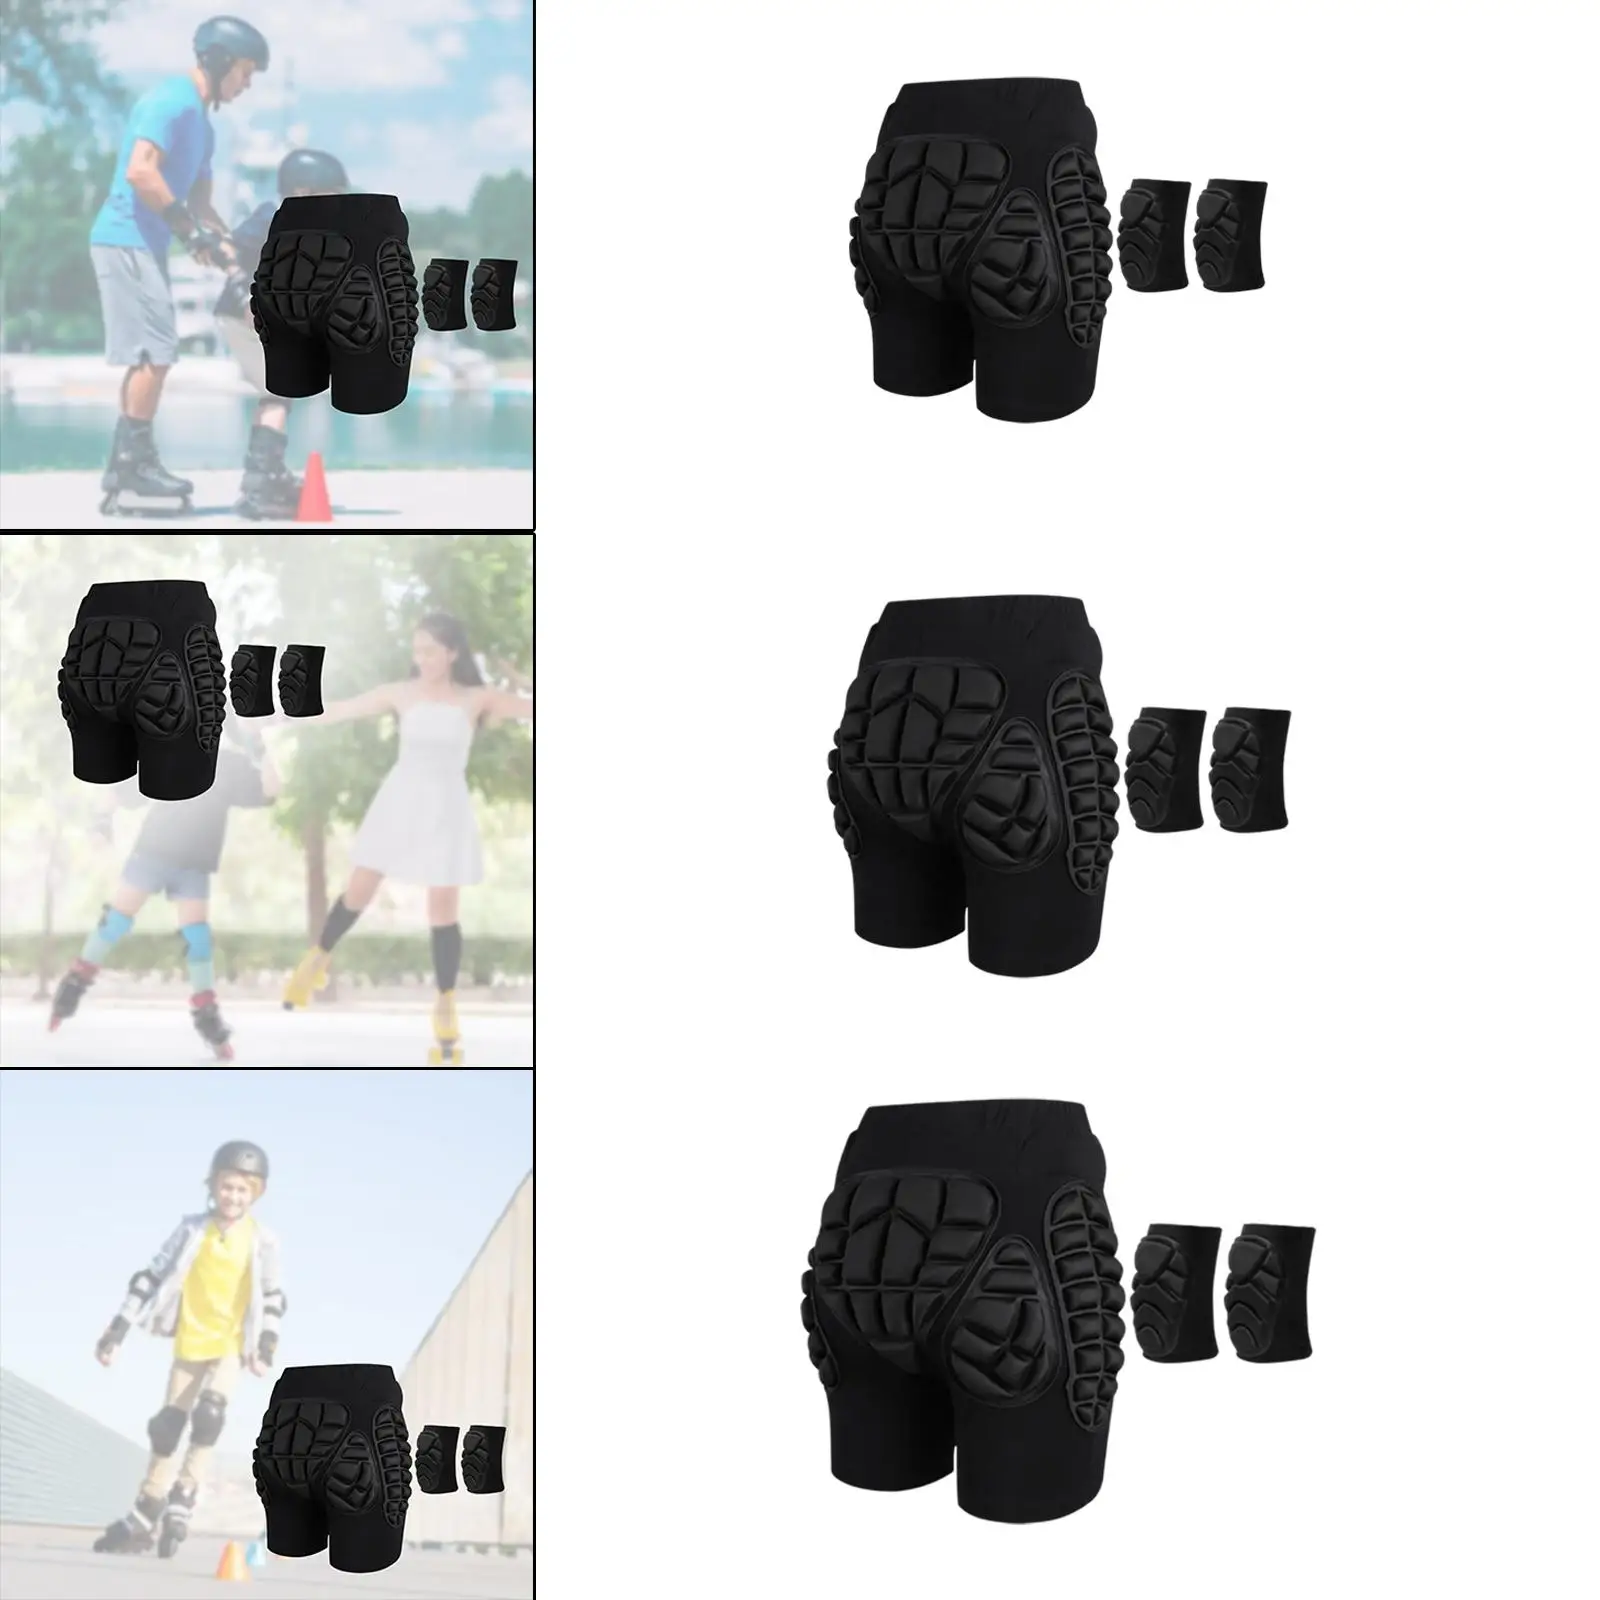 Padded Shorts with 1 Pair Knee Pads Tailbone  Protective Gear  Piece Hip Pad Butt Pad  Pad for Snowboarding